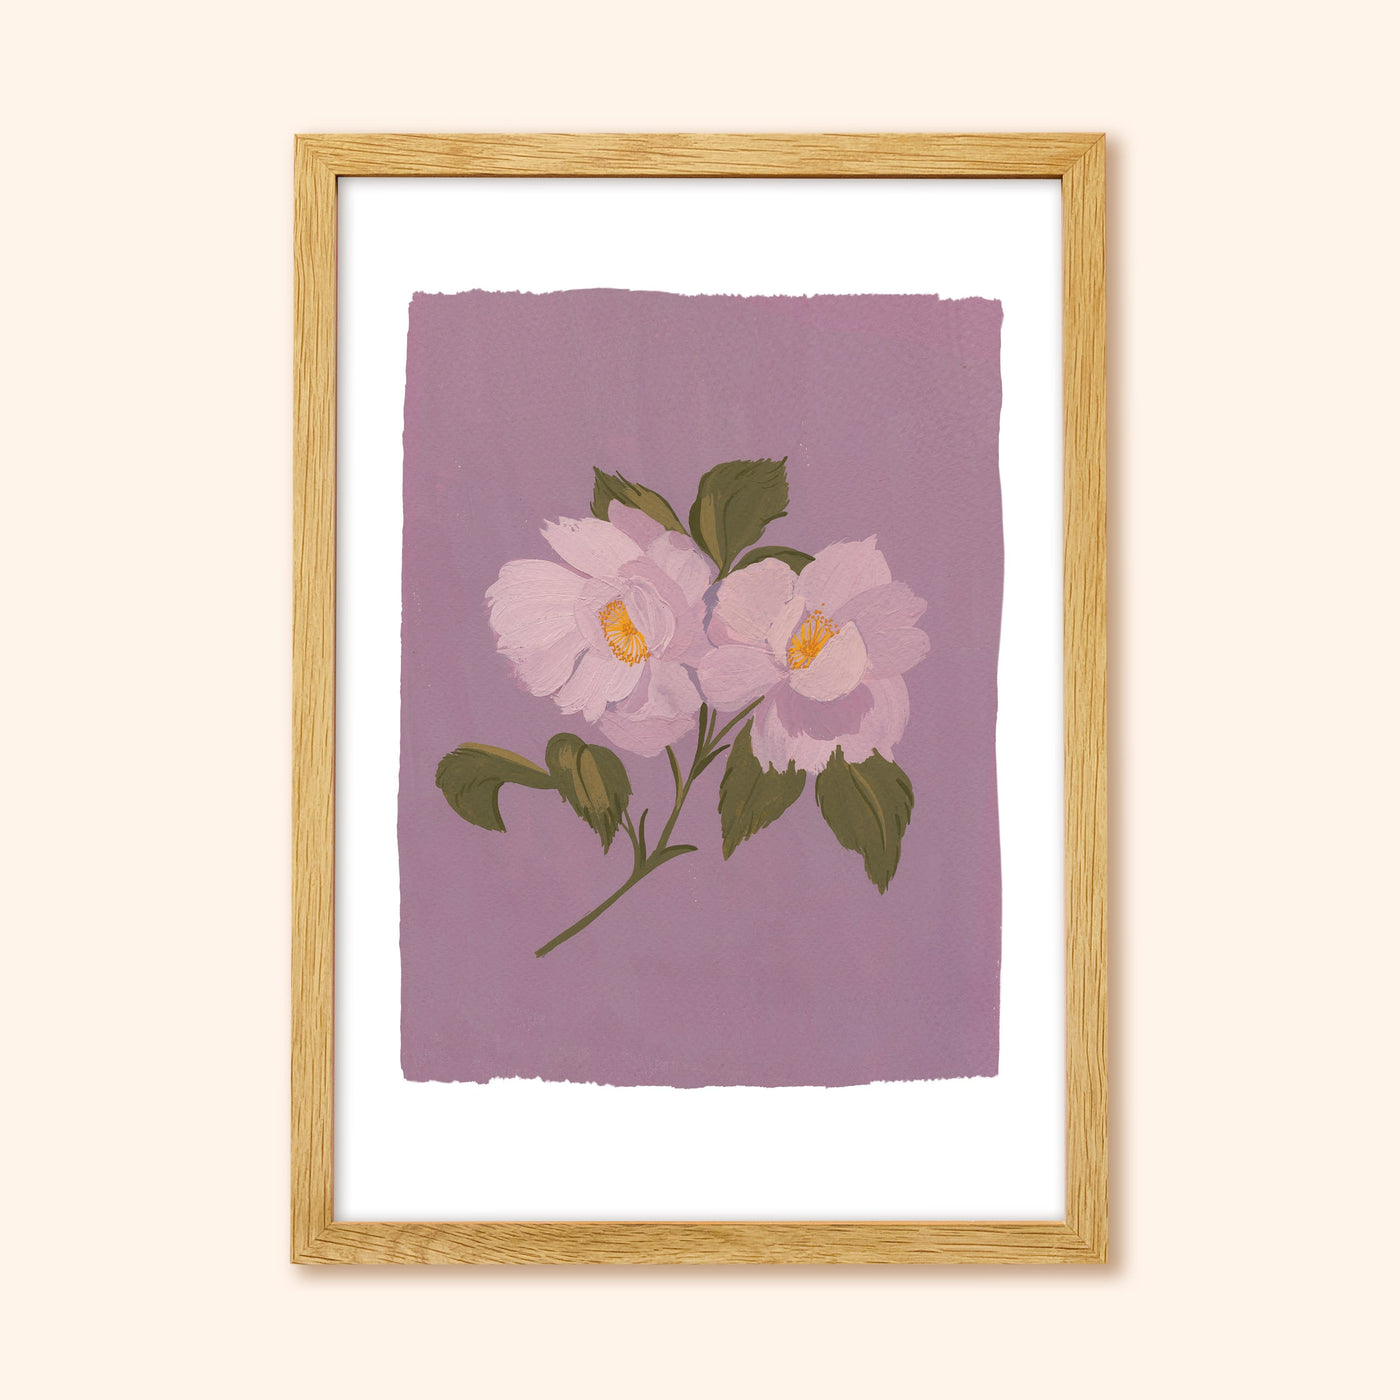 An illustrated floral print of purple roses in a light-coloured wooden frame